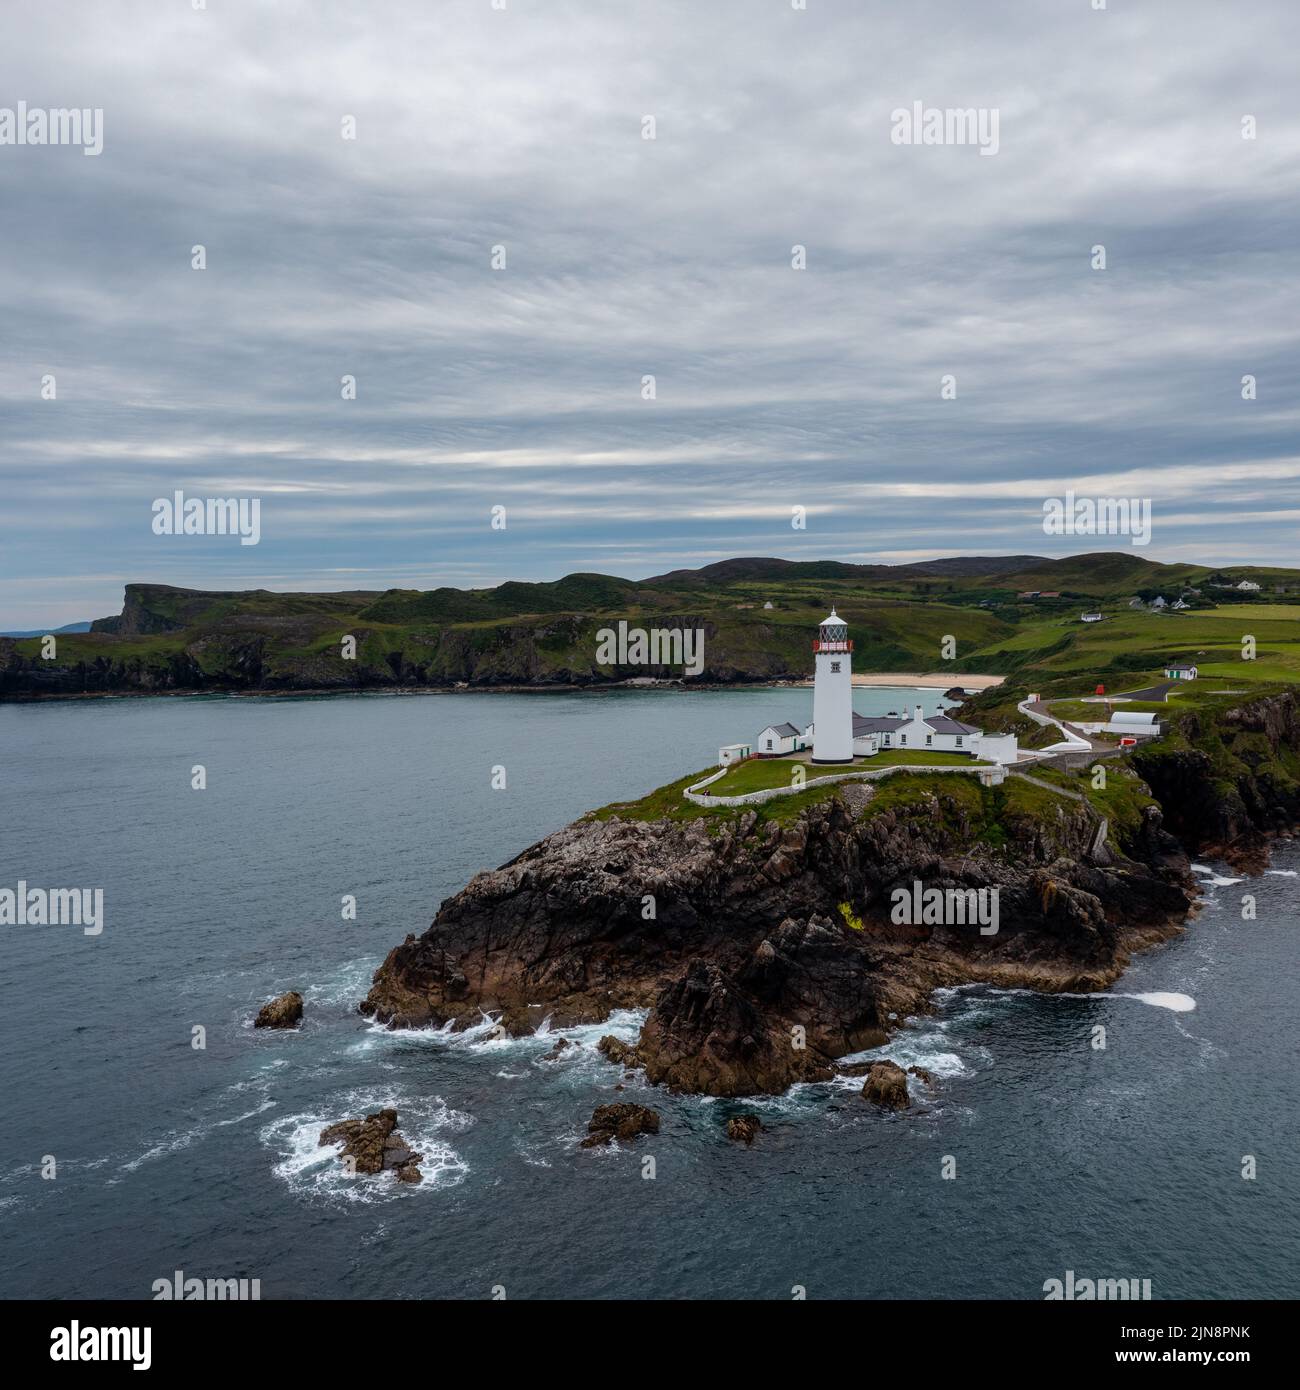 A drone landscape view of Fanad Head Lighthouse and Peninsula on the northern coast of Ireland Stock Photo